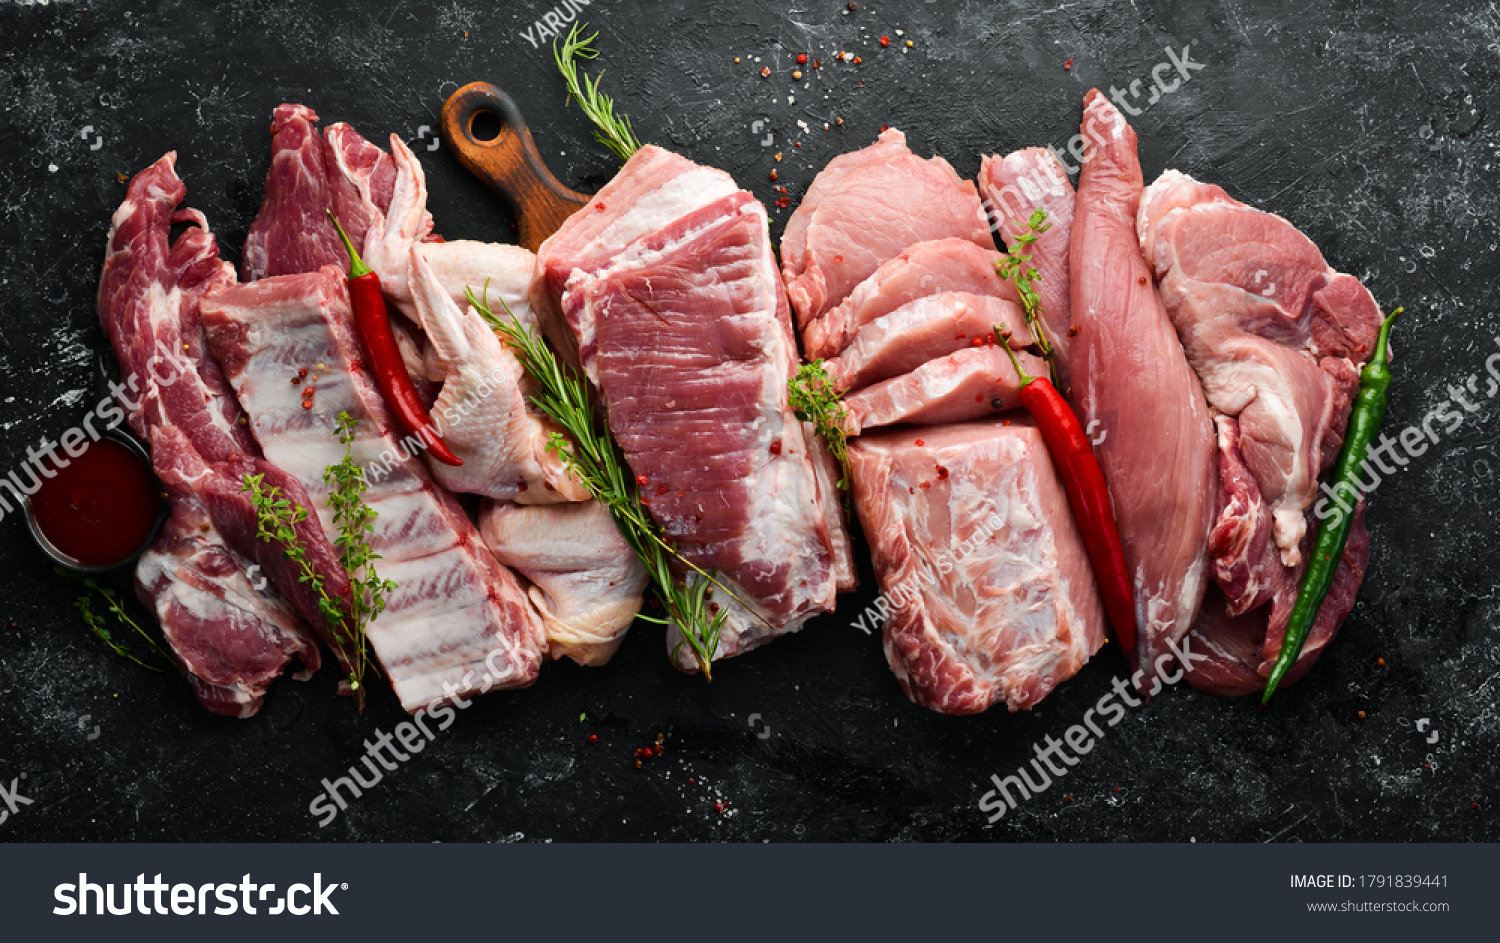 Set of raw meat. Pork meat on black stone background with spices and herbs. Top view. Rustic style. #1791839441